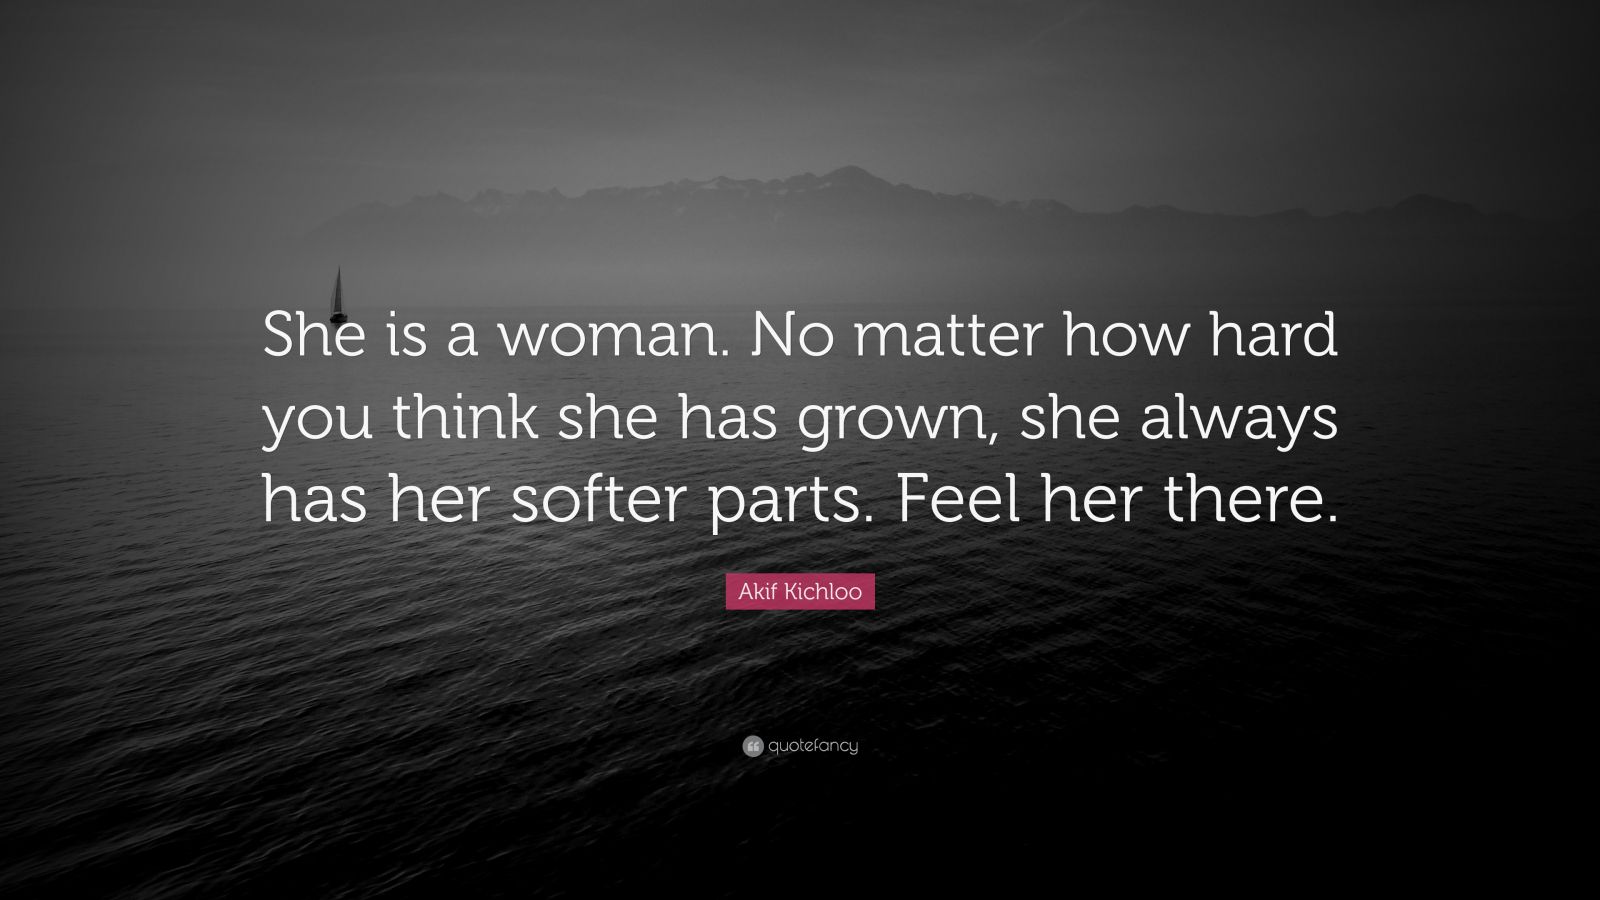 Akif Kichloo Quote: “She is a woman. No matter how hard you think she ...